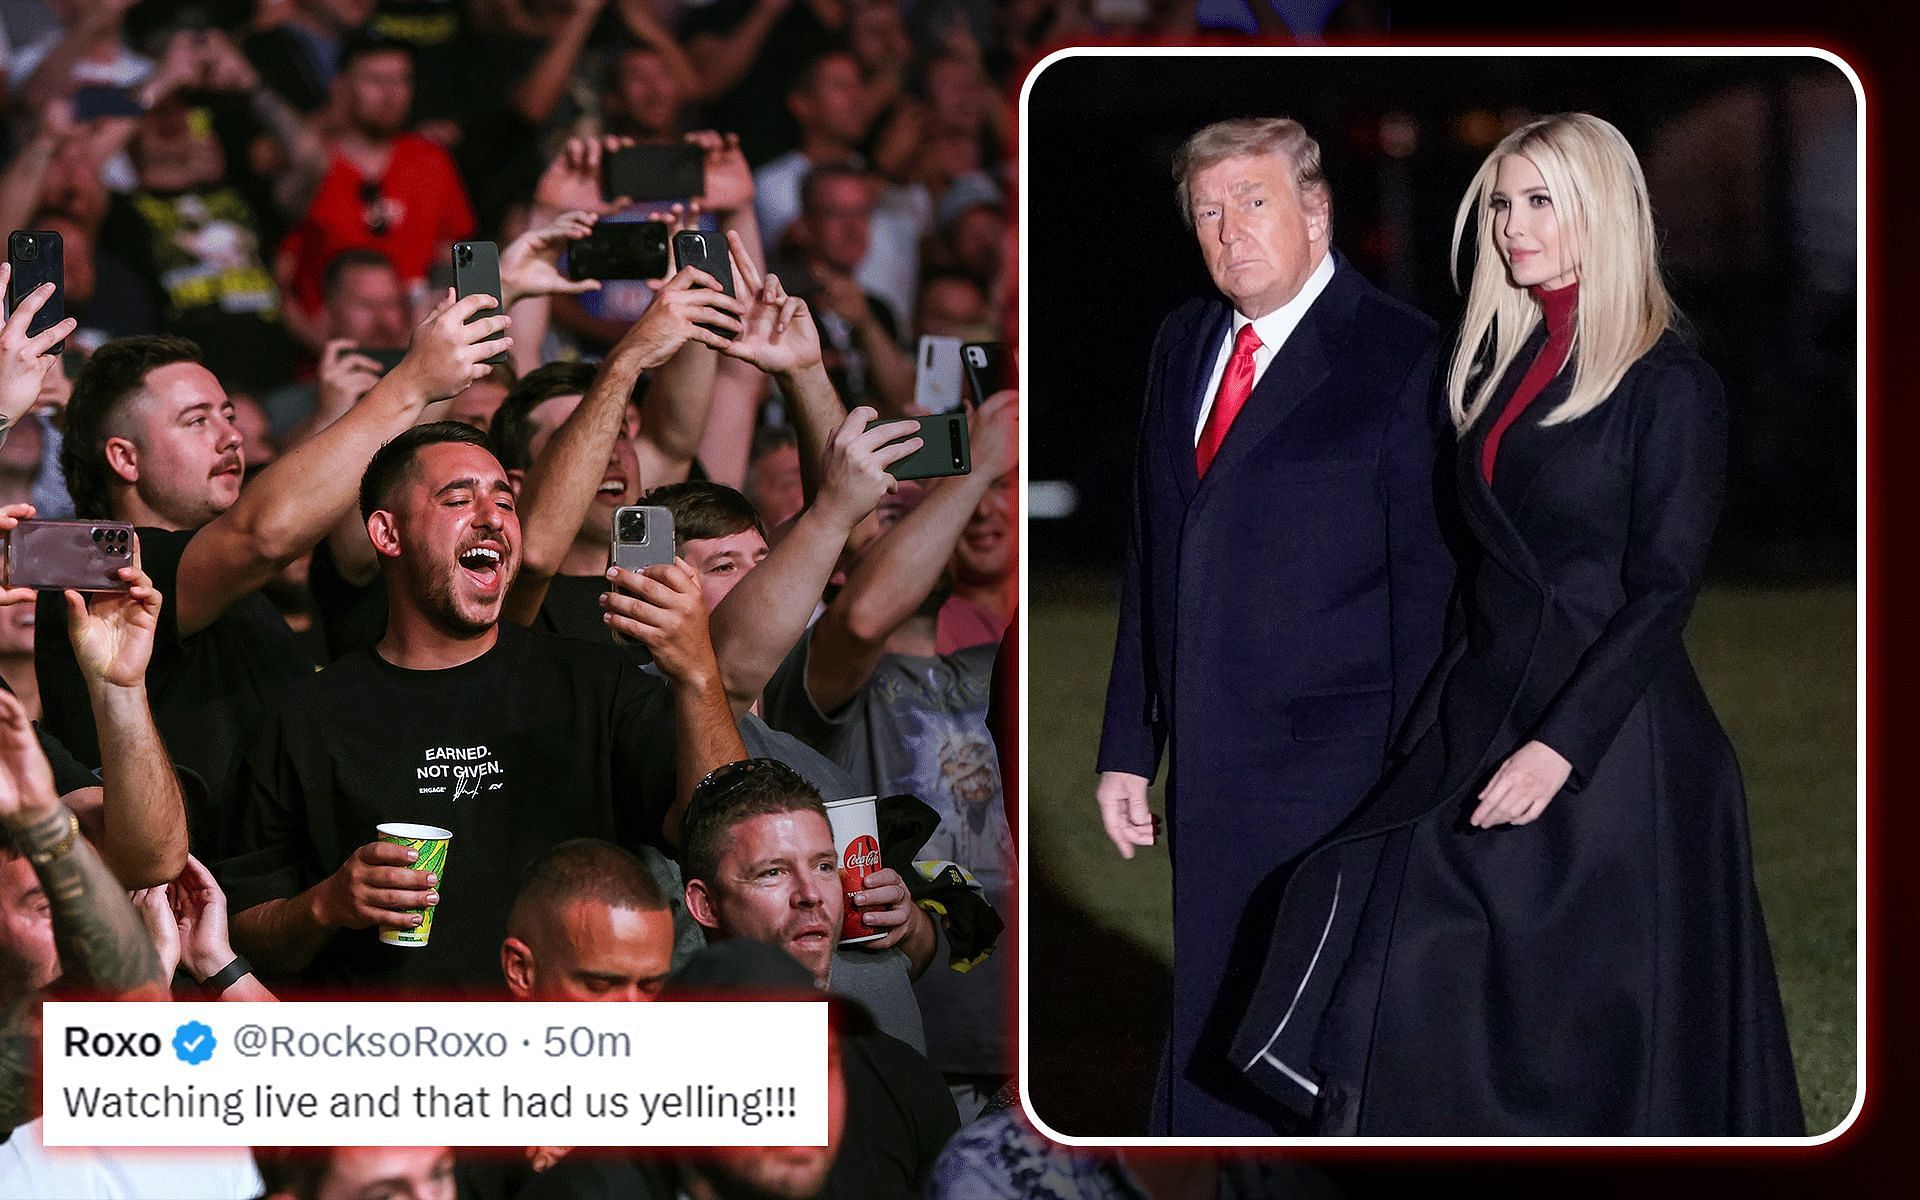 Miami crowd to reacts to Donad Trump entering the arena [Images via Getty]